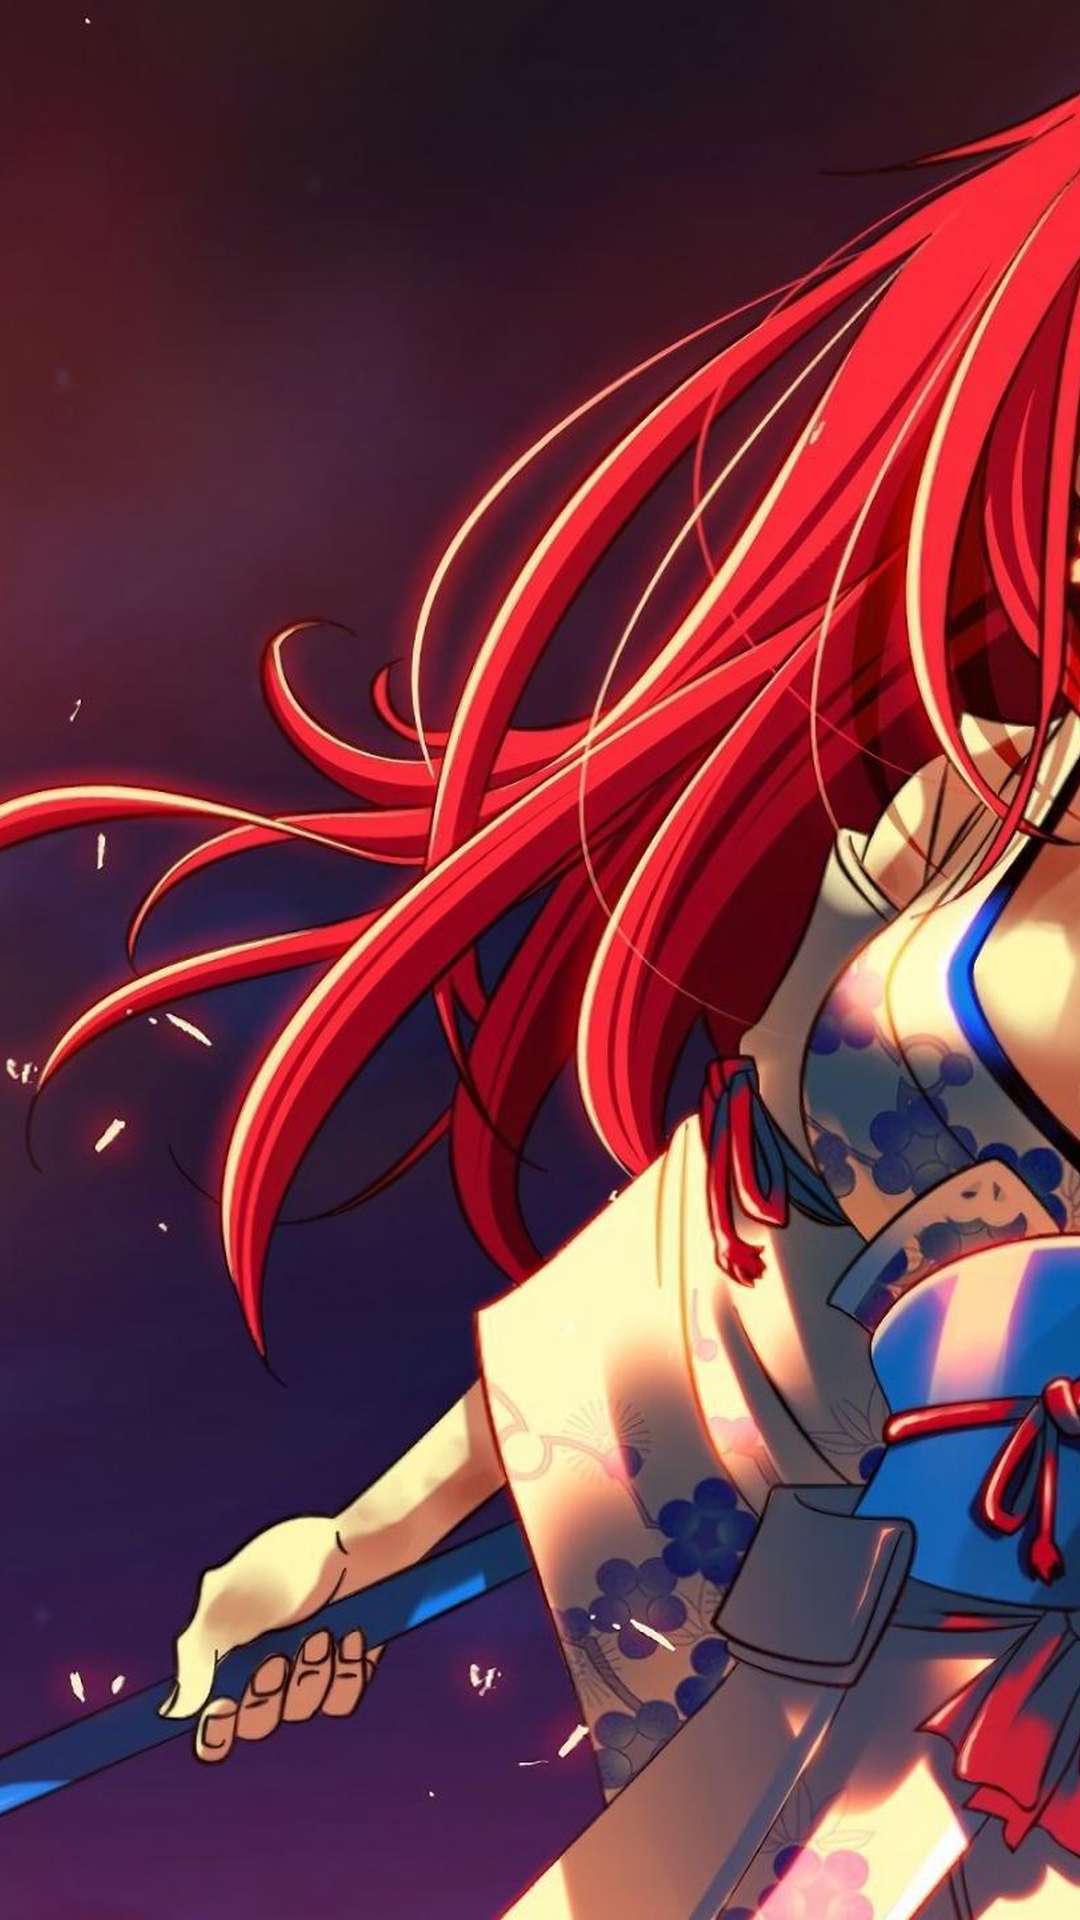 Wallpaper ID 796825  redhead 1080P Fairy Tail Scarlet Erza anime free  download